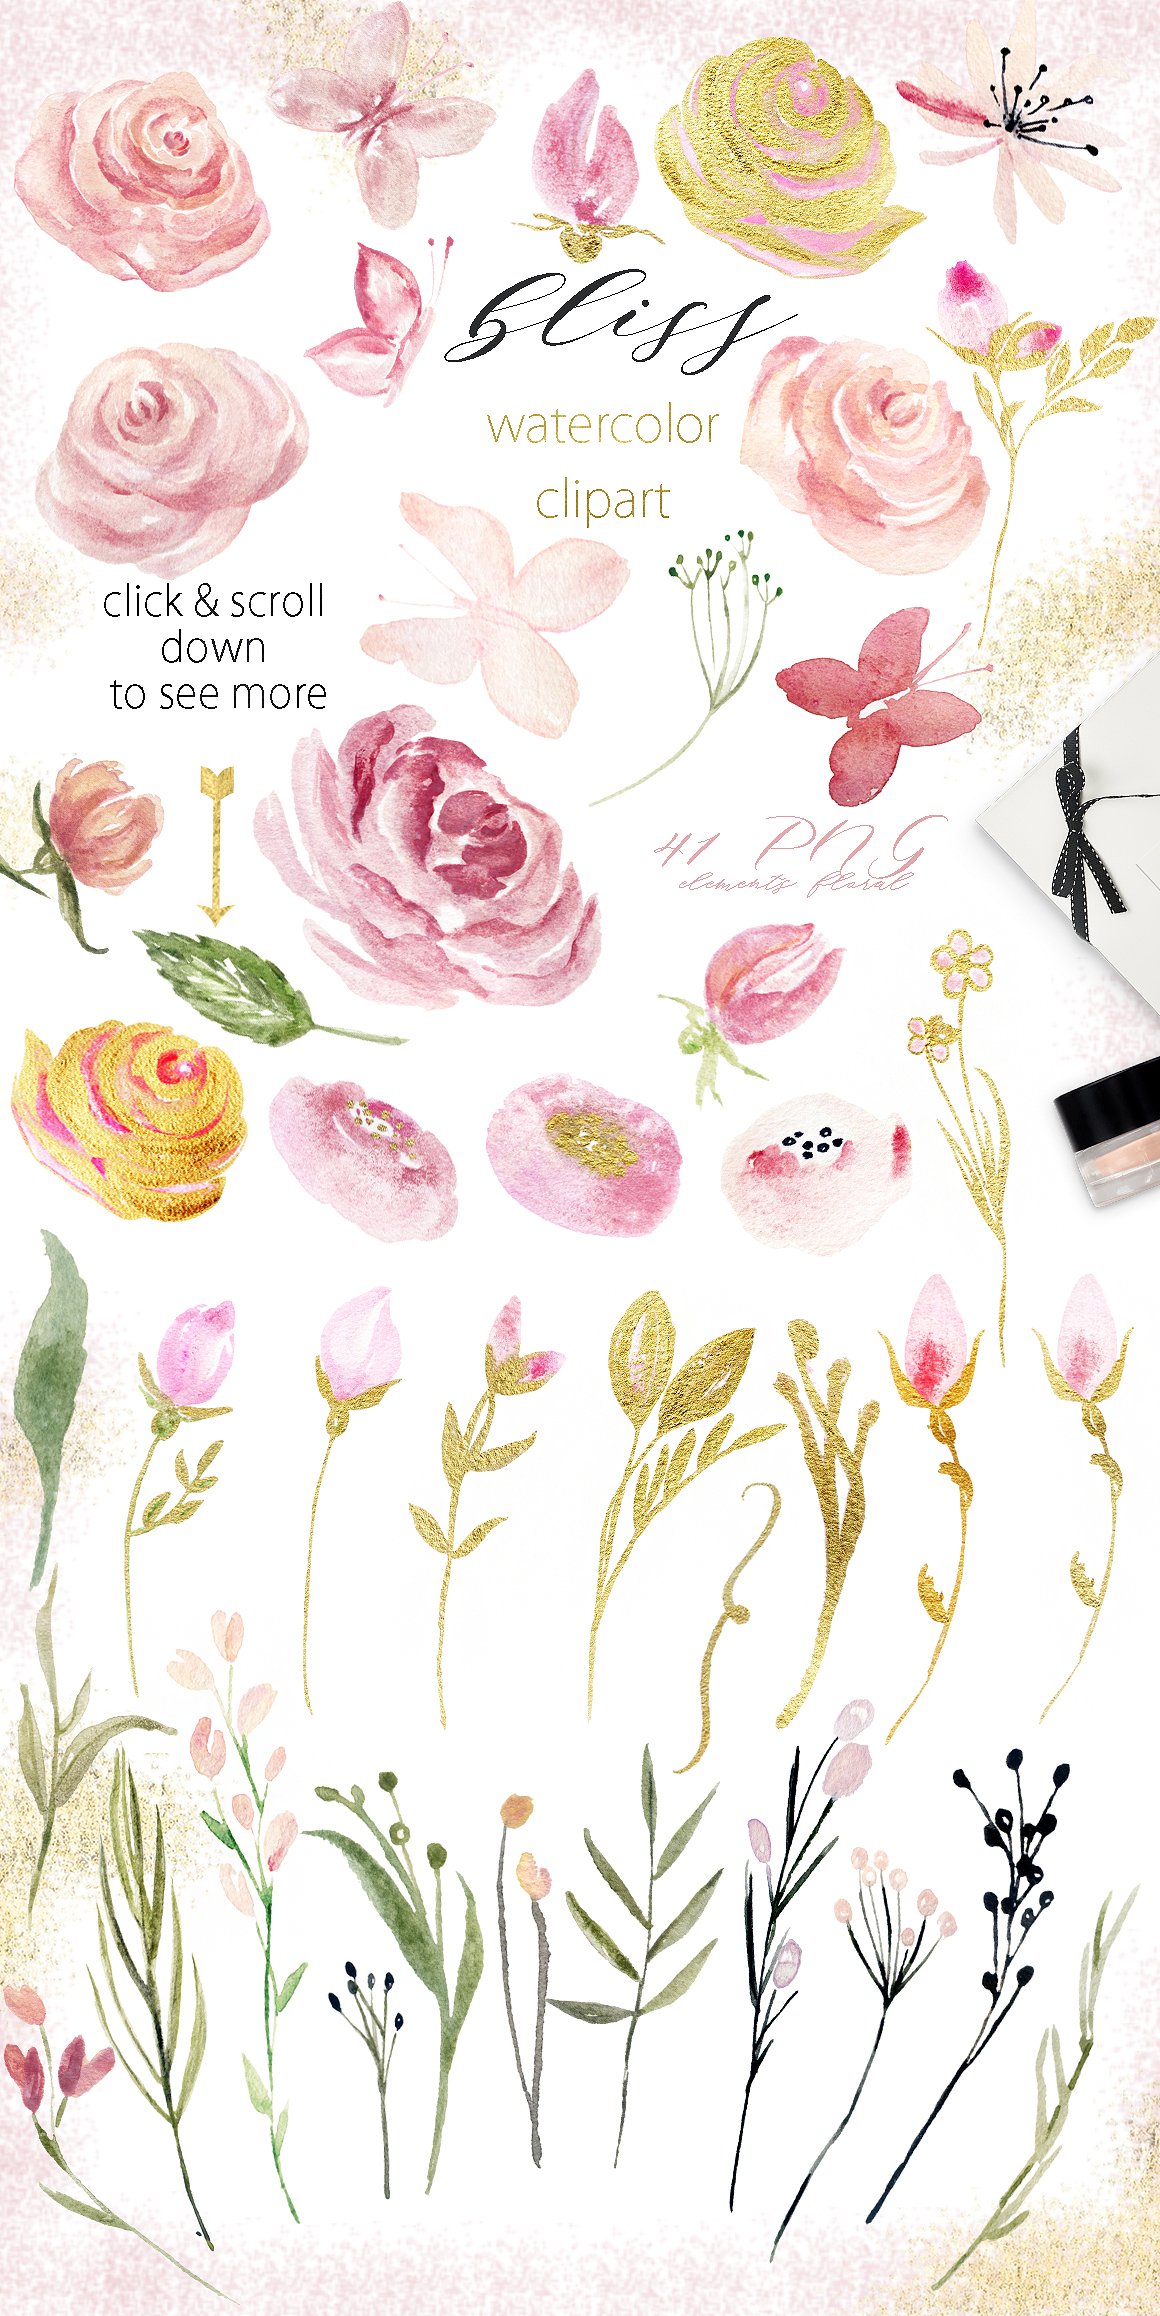 Watercolor clipart. Bliss. Pni